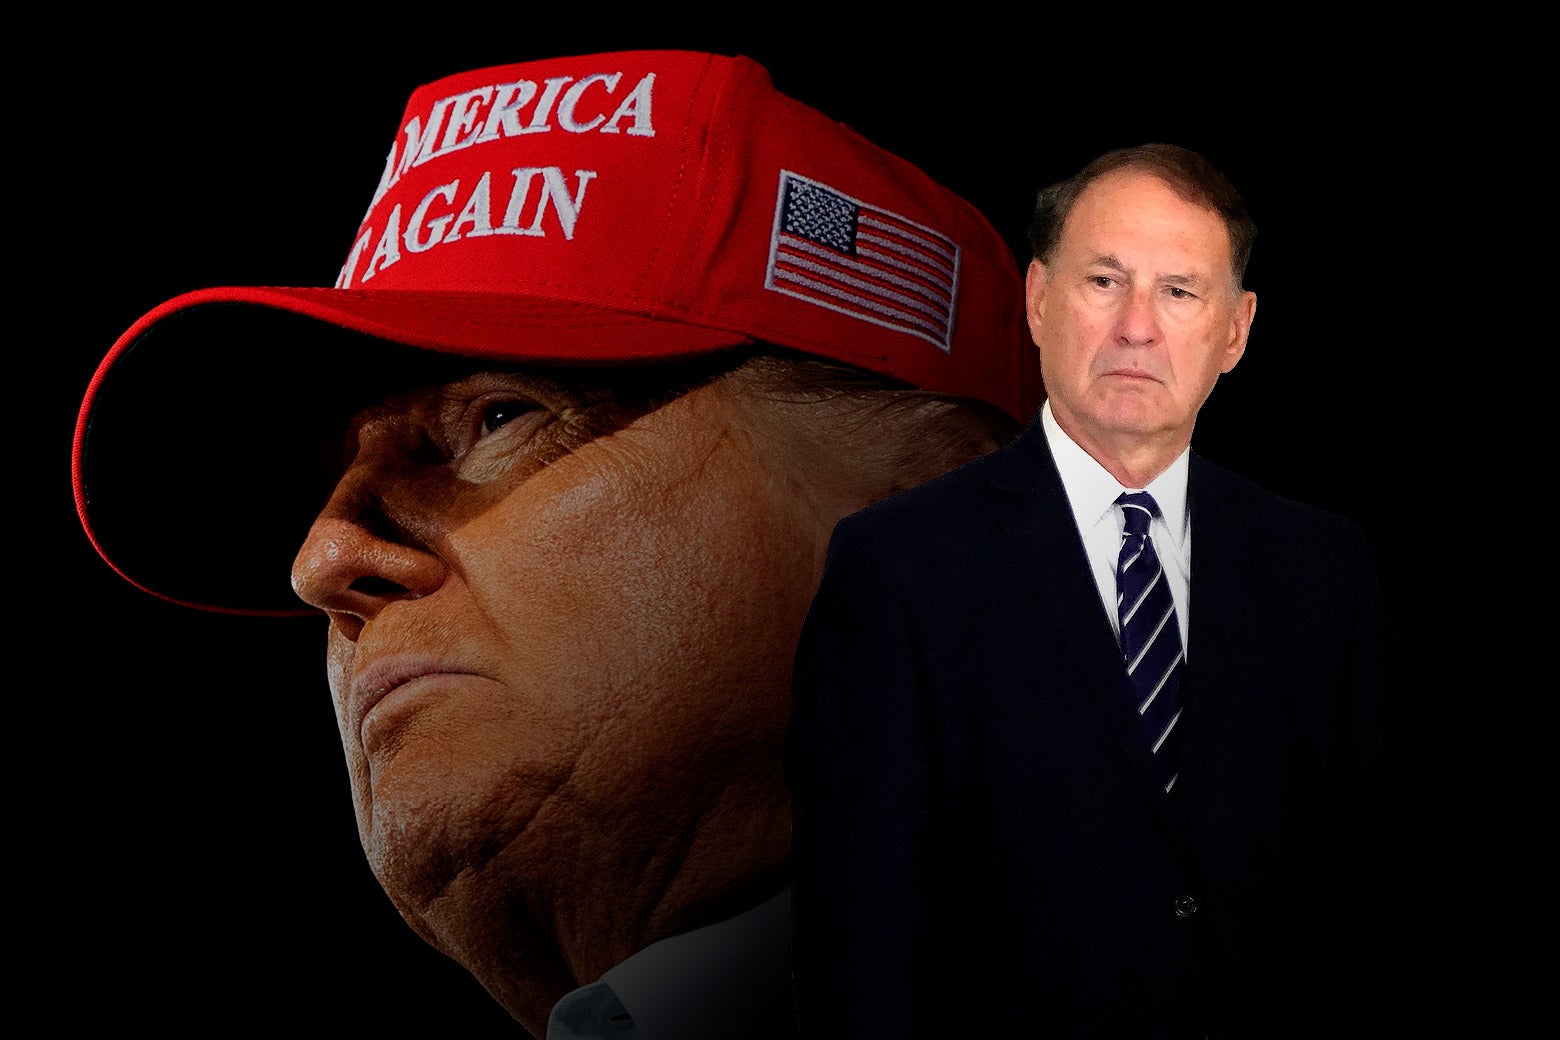 Donald Trump wearing a red Make America Great Again cap juxtaposed with a worrisome-looking Justice Samuel Alito.